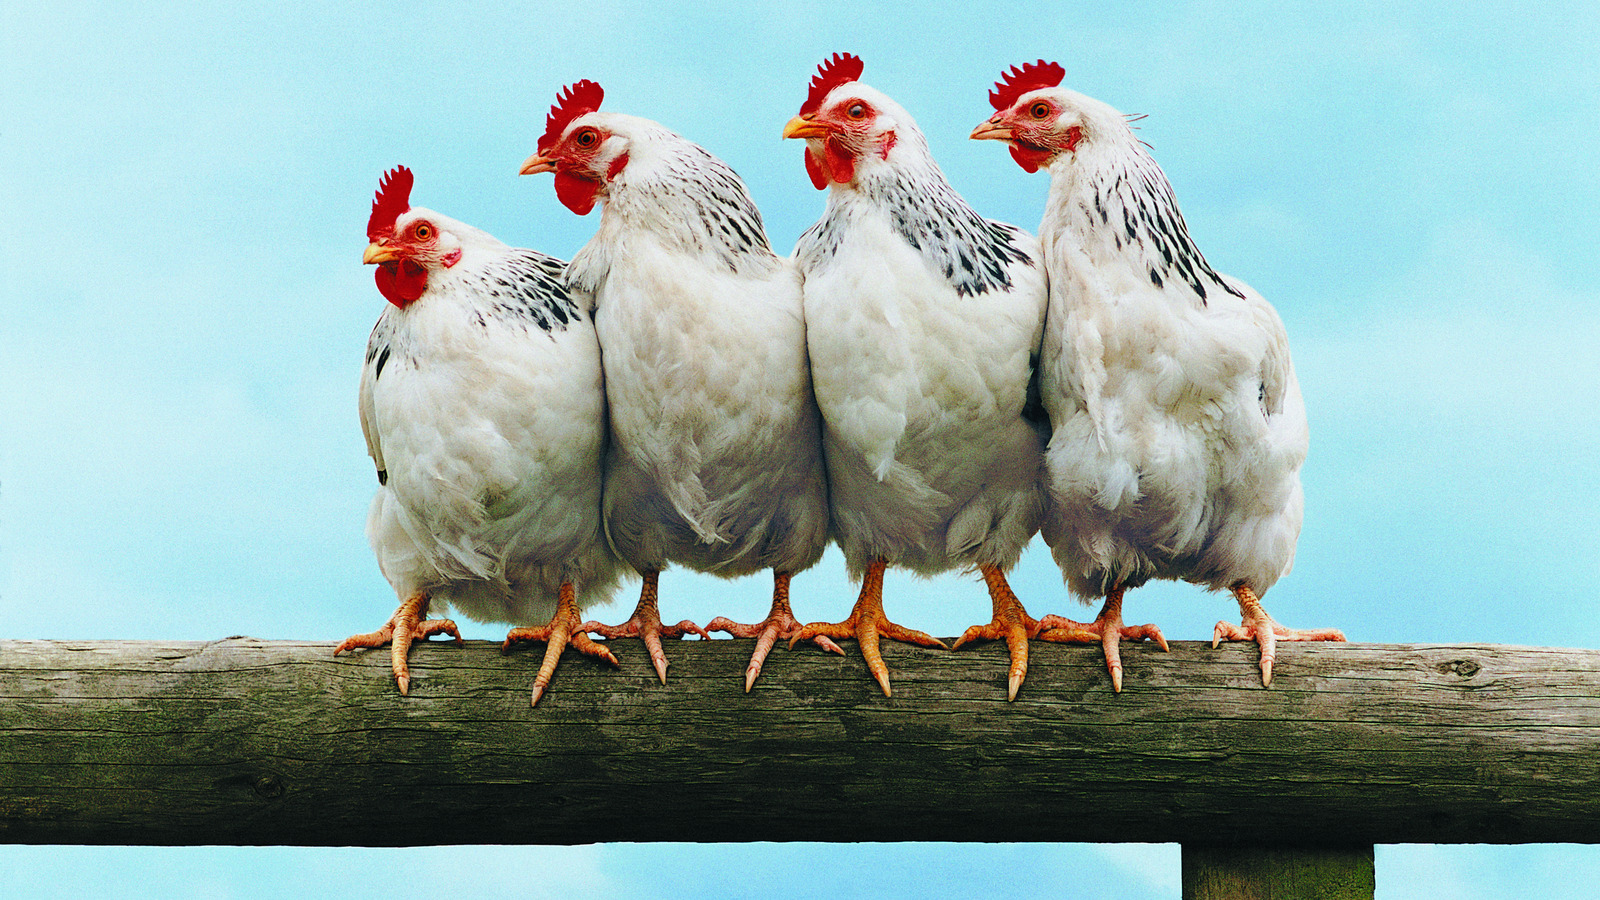 The Chicken Of Tomorrow Contest Changed The Poultry Industry Forever – Tasting Table